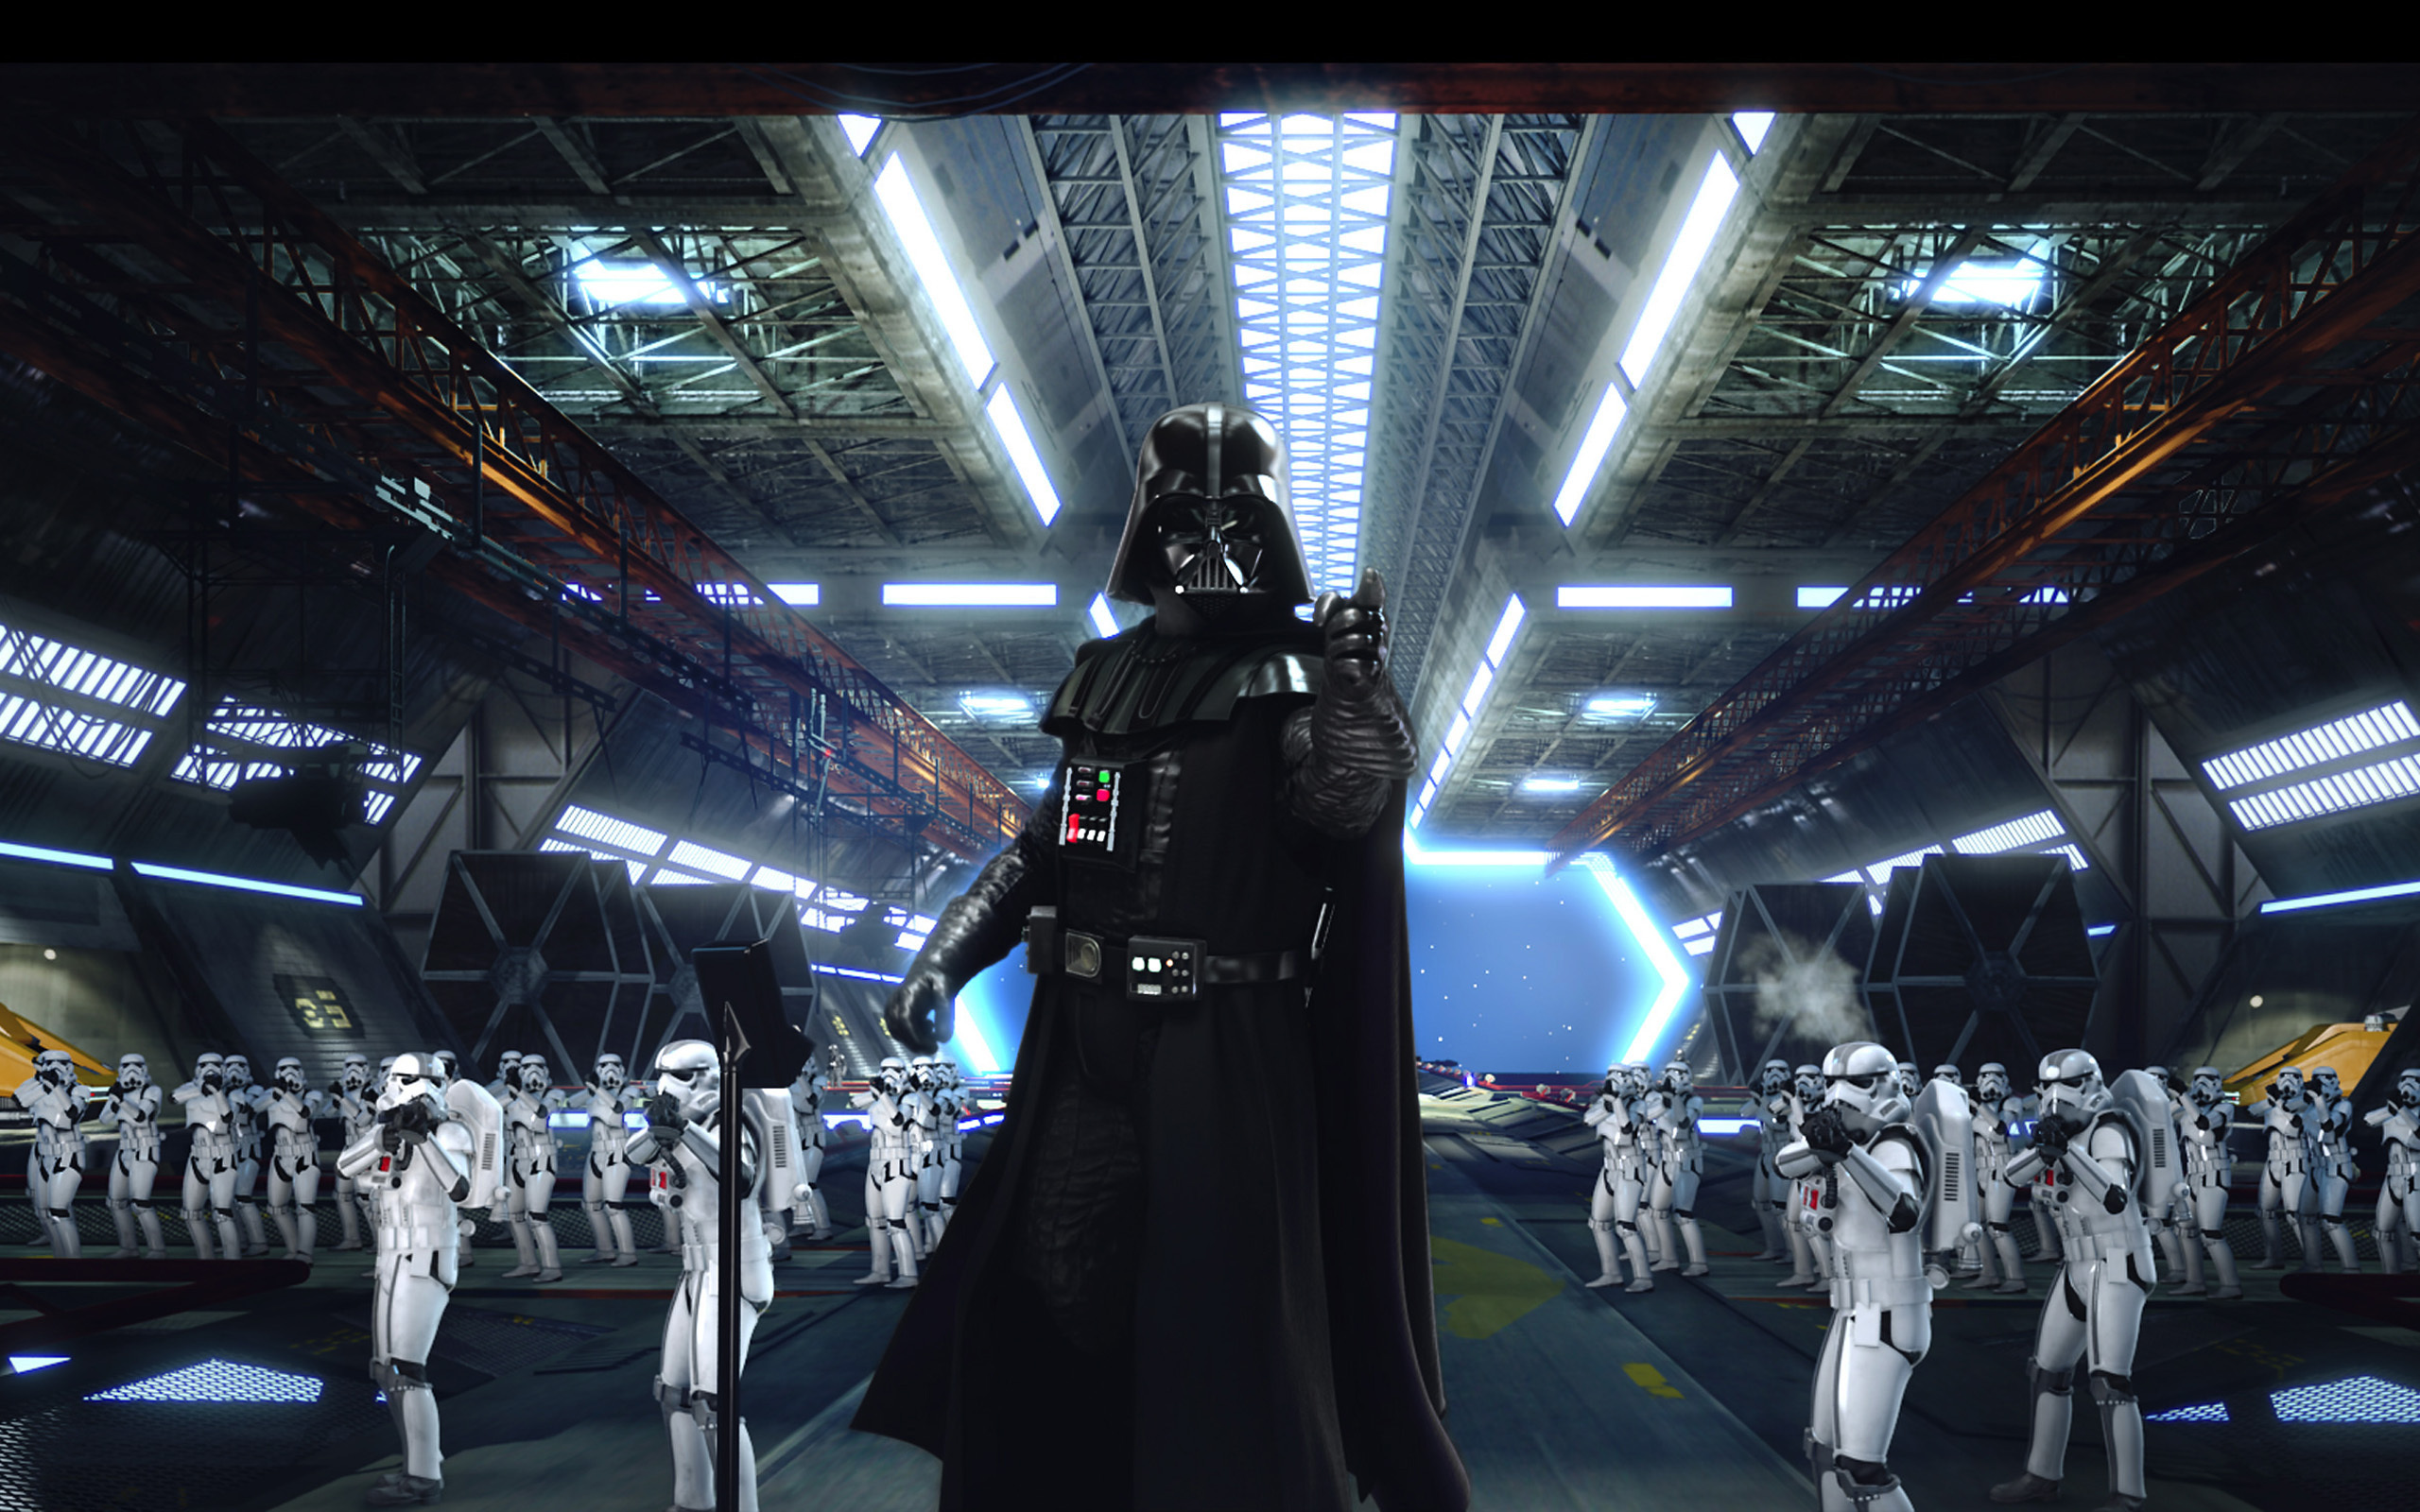  wallpaper 2560 x 1600 darth vader wallpapers download backgrounds 2560x1600